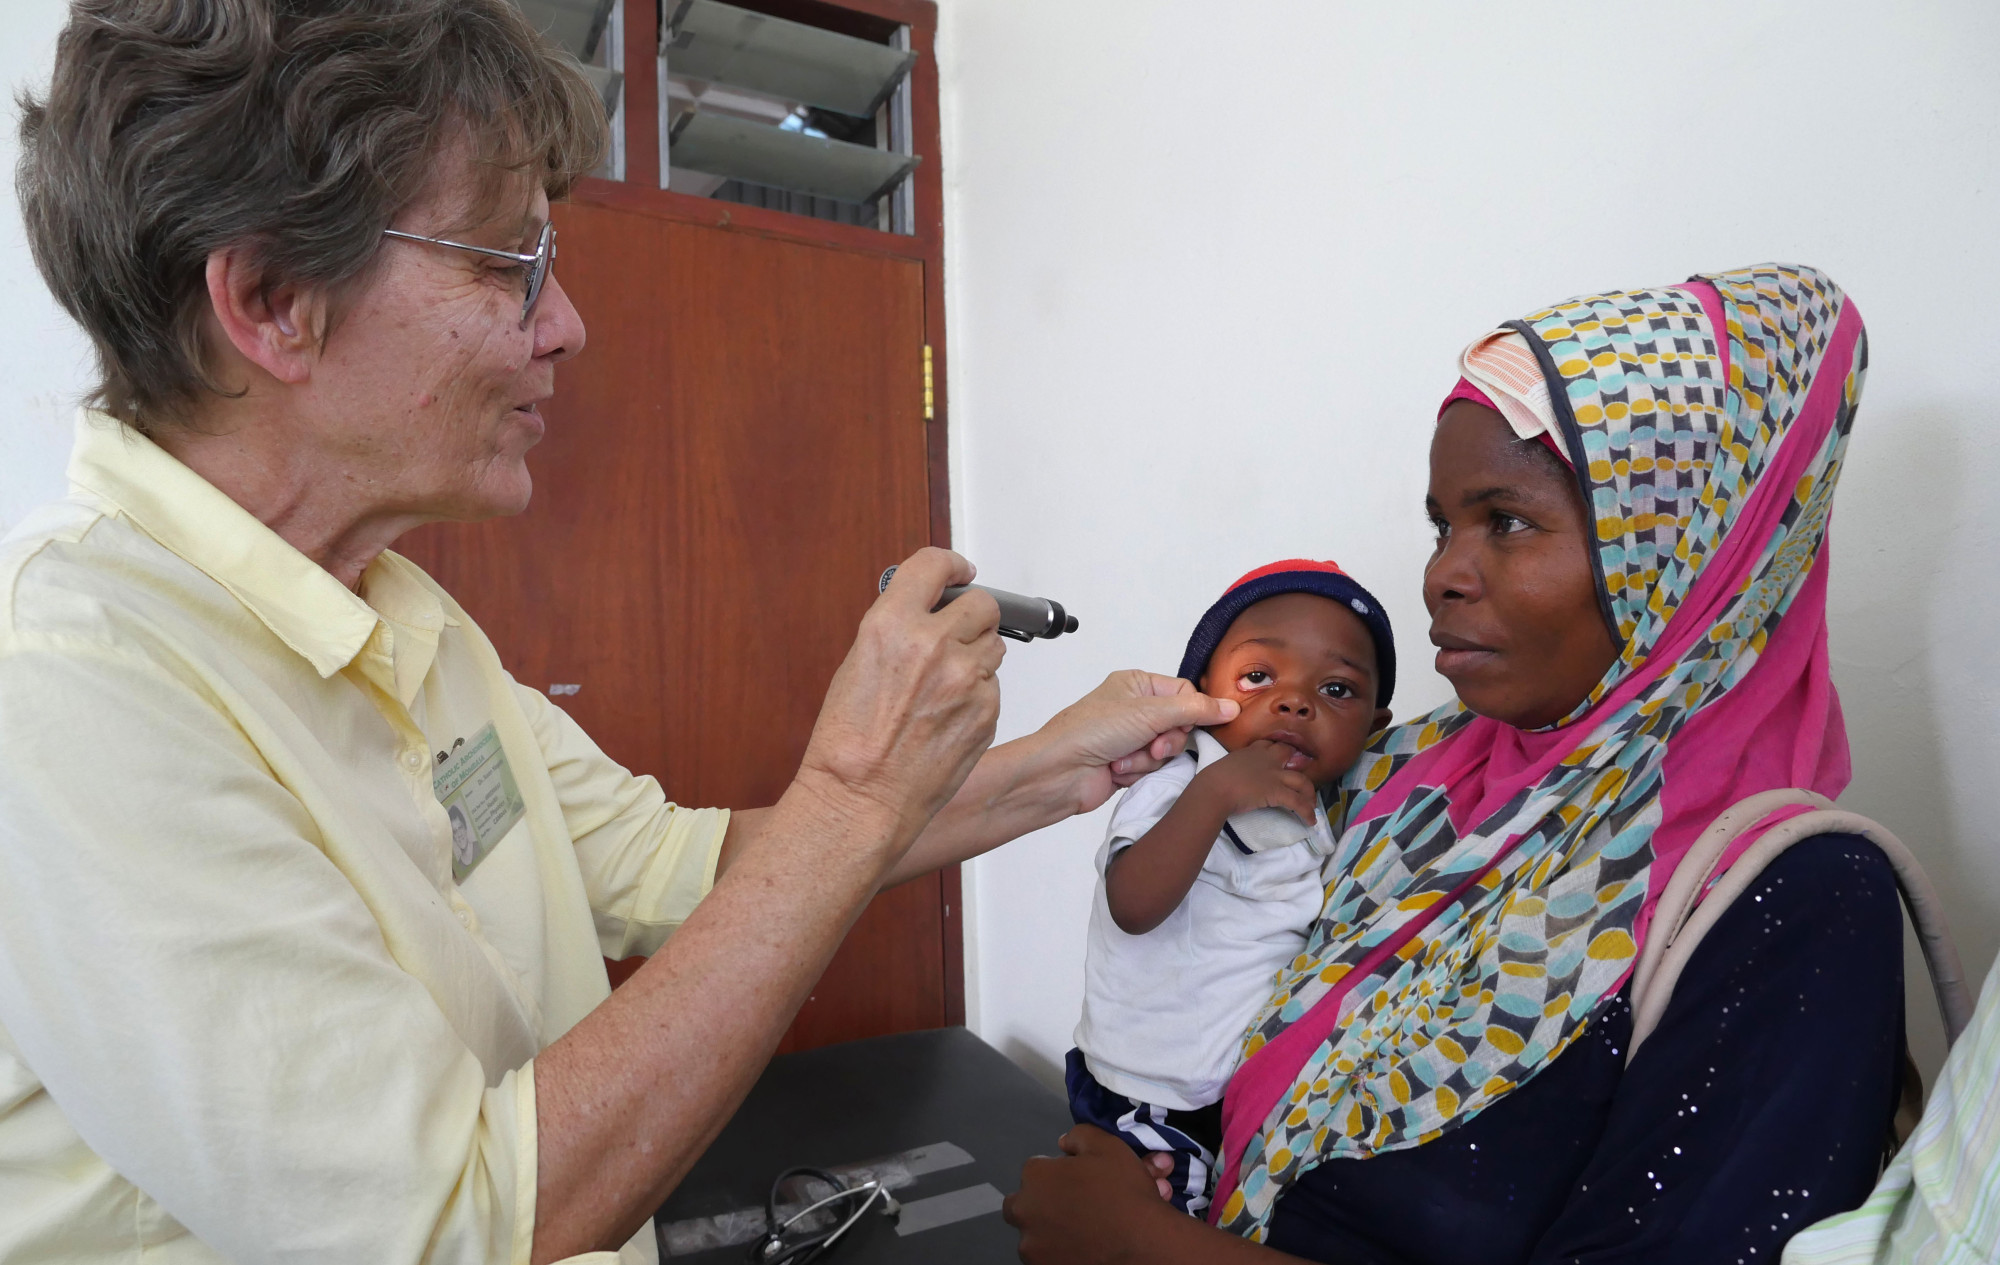 Susan Nagele, working as a physician at St. Patrick Dispensary in Mombasa, Kenya